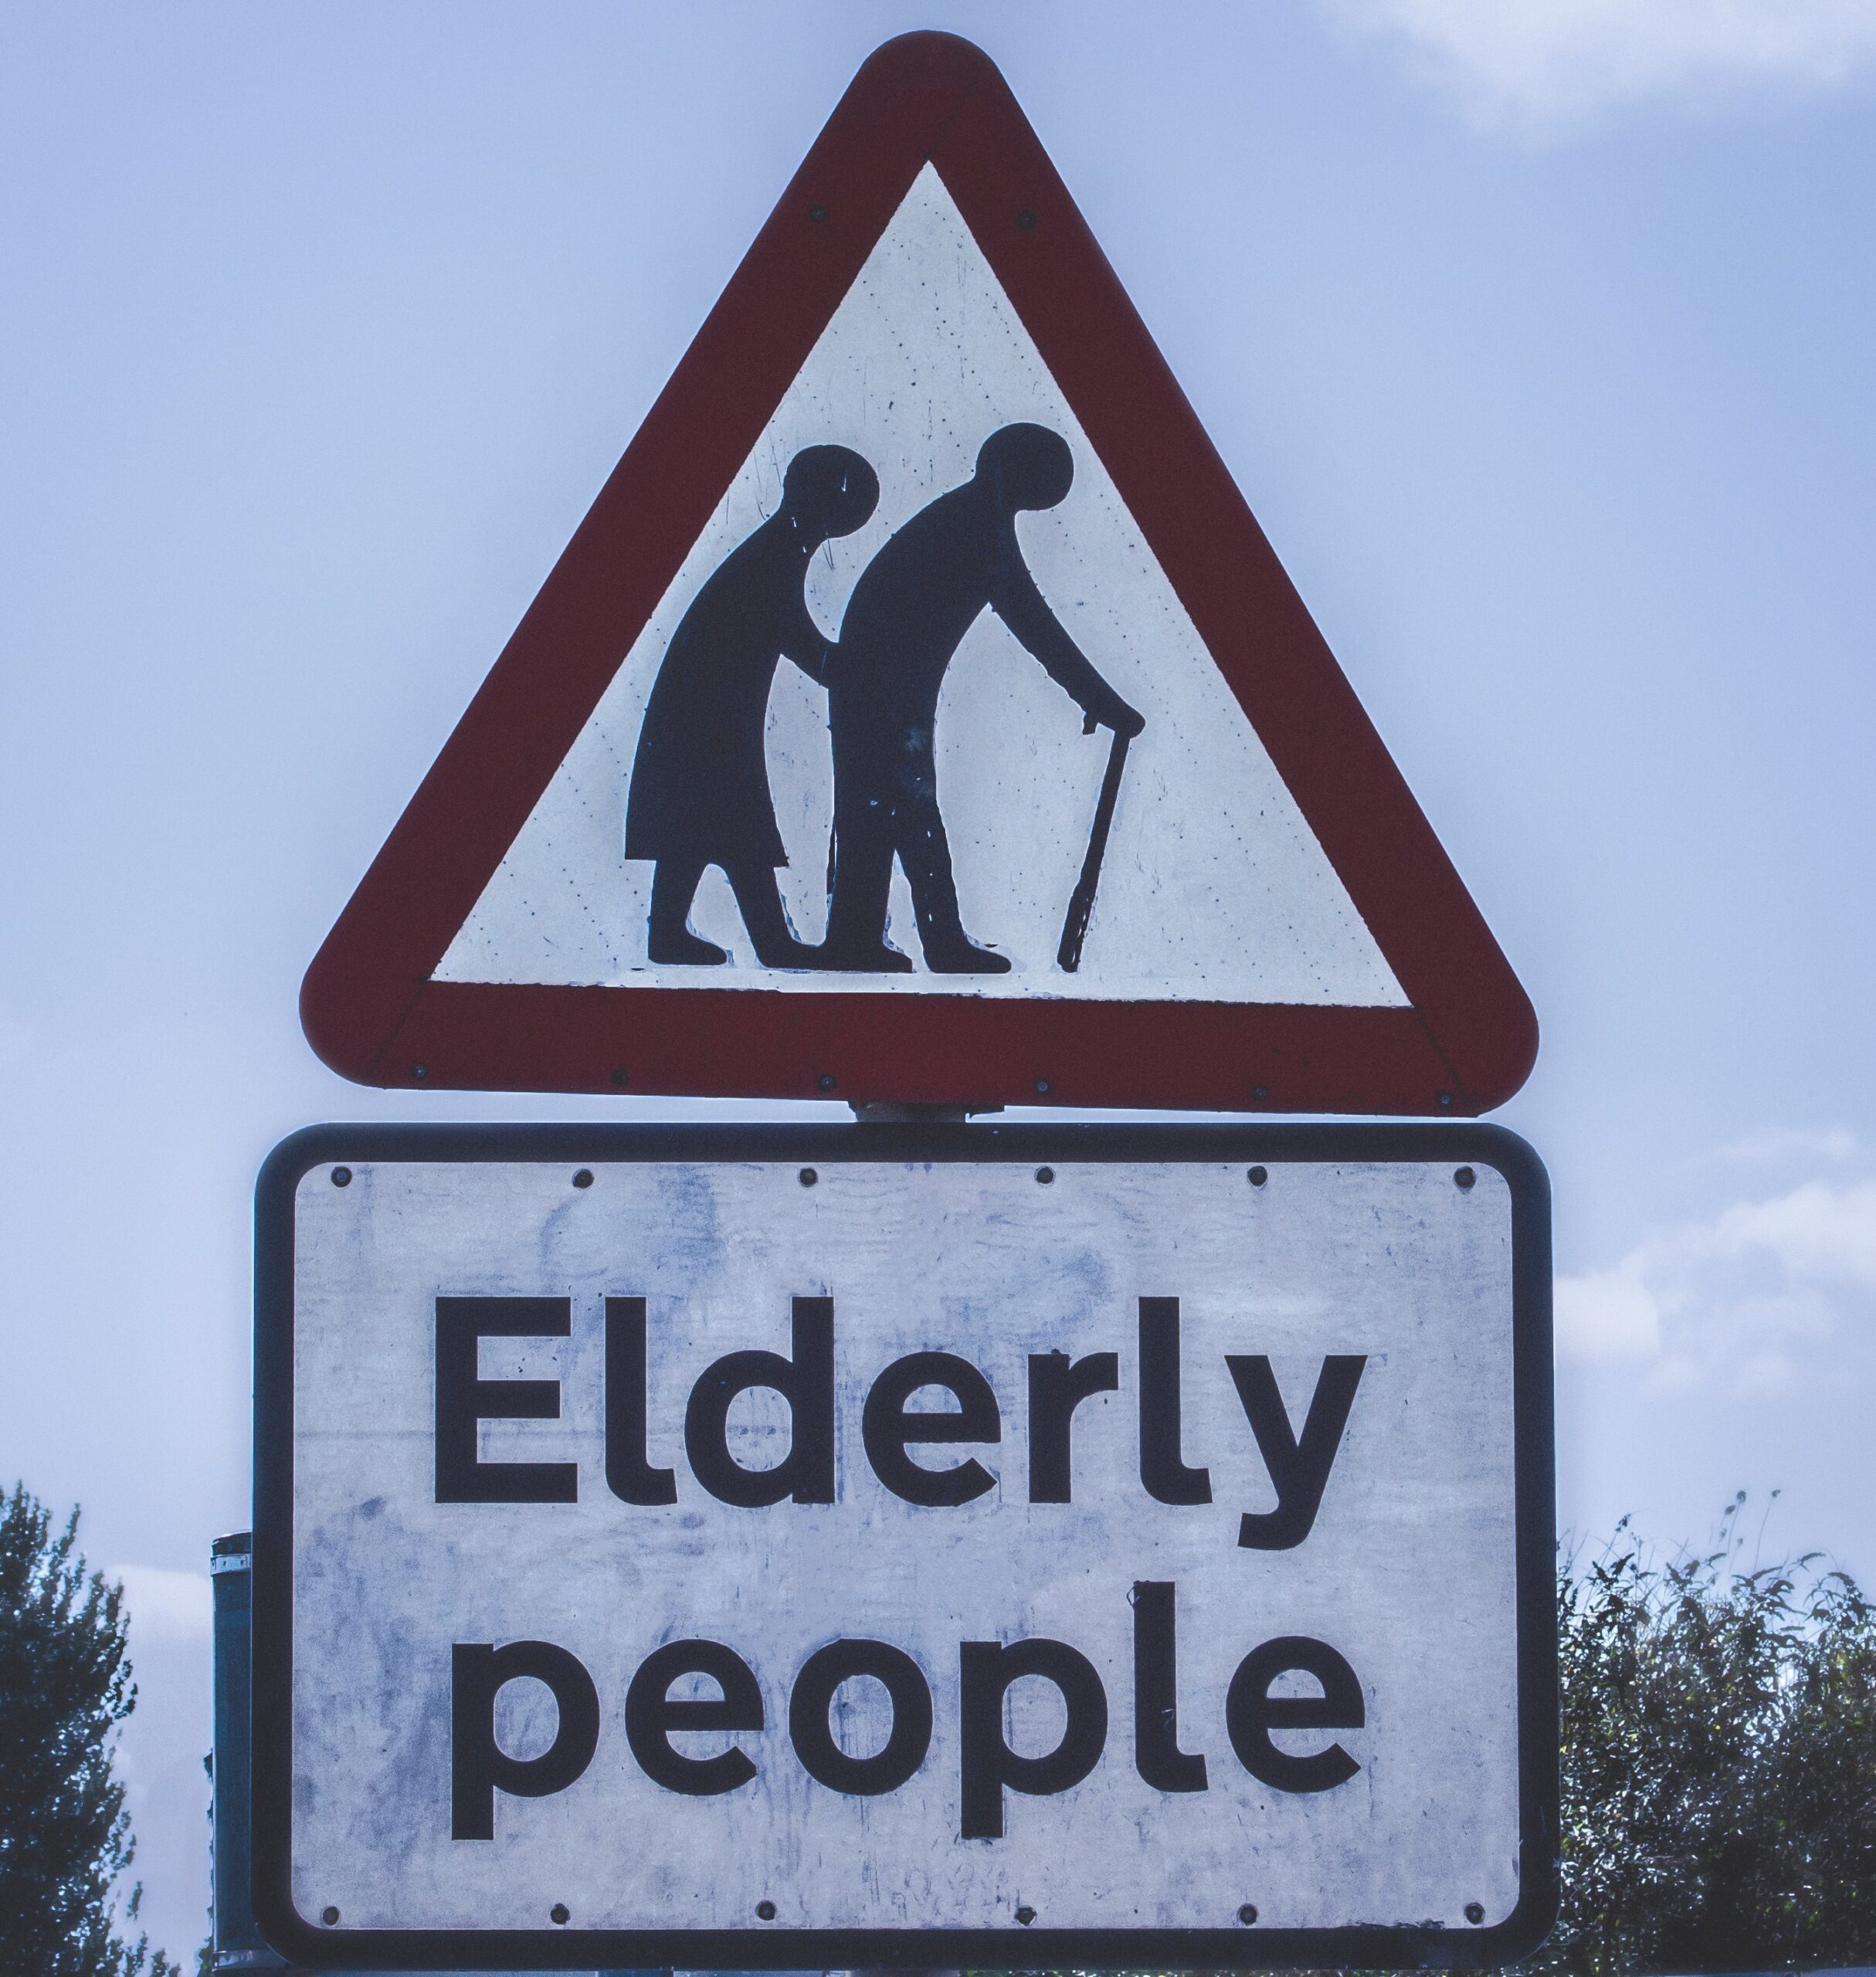 A road sign for elderly people